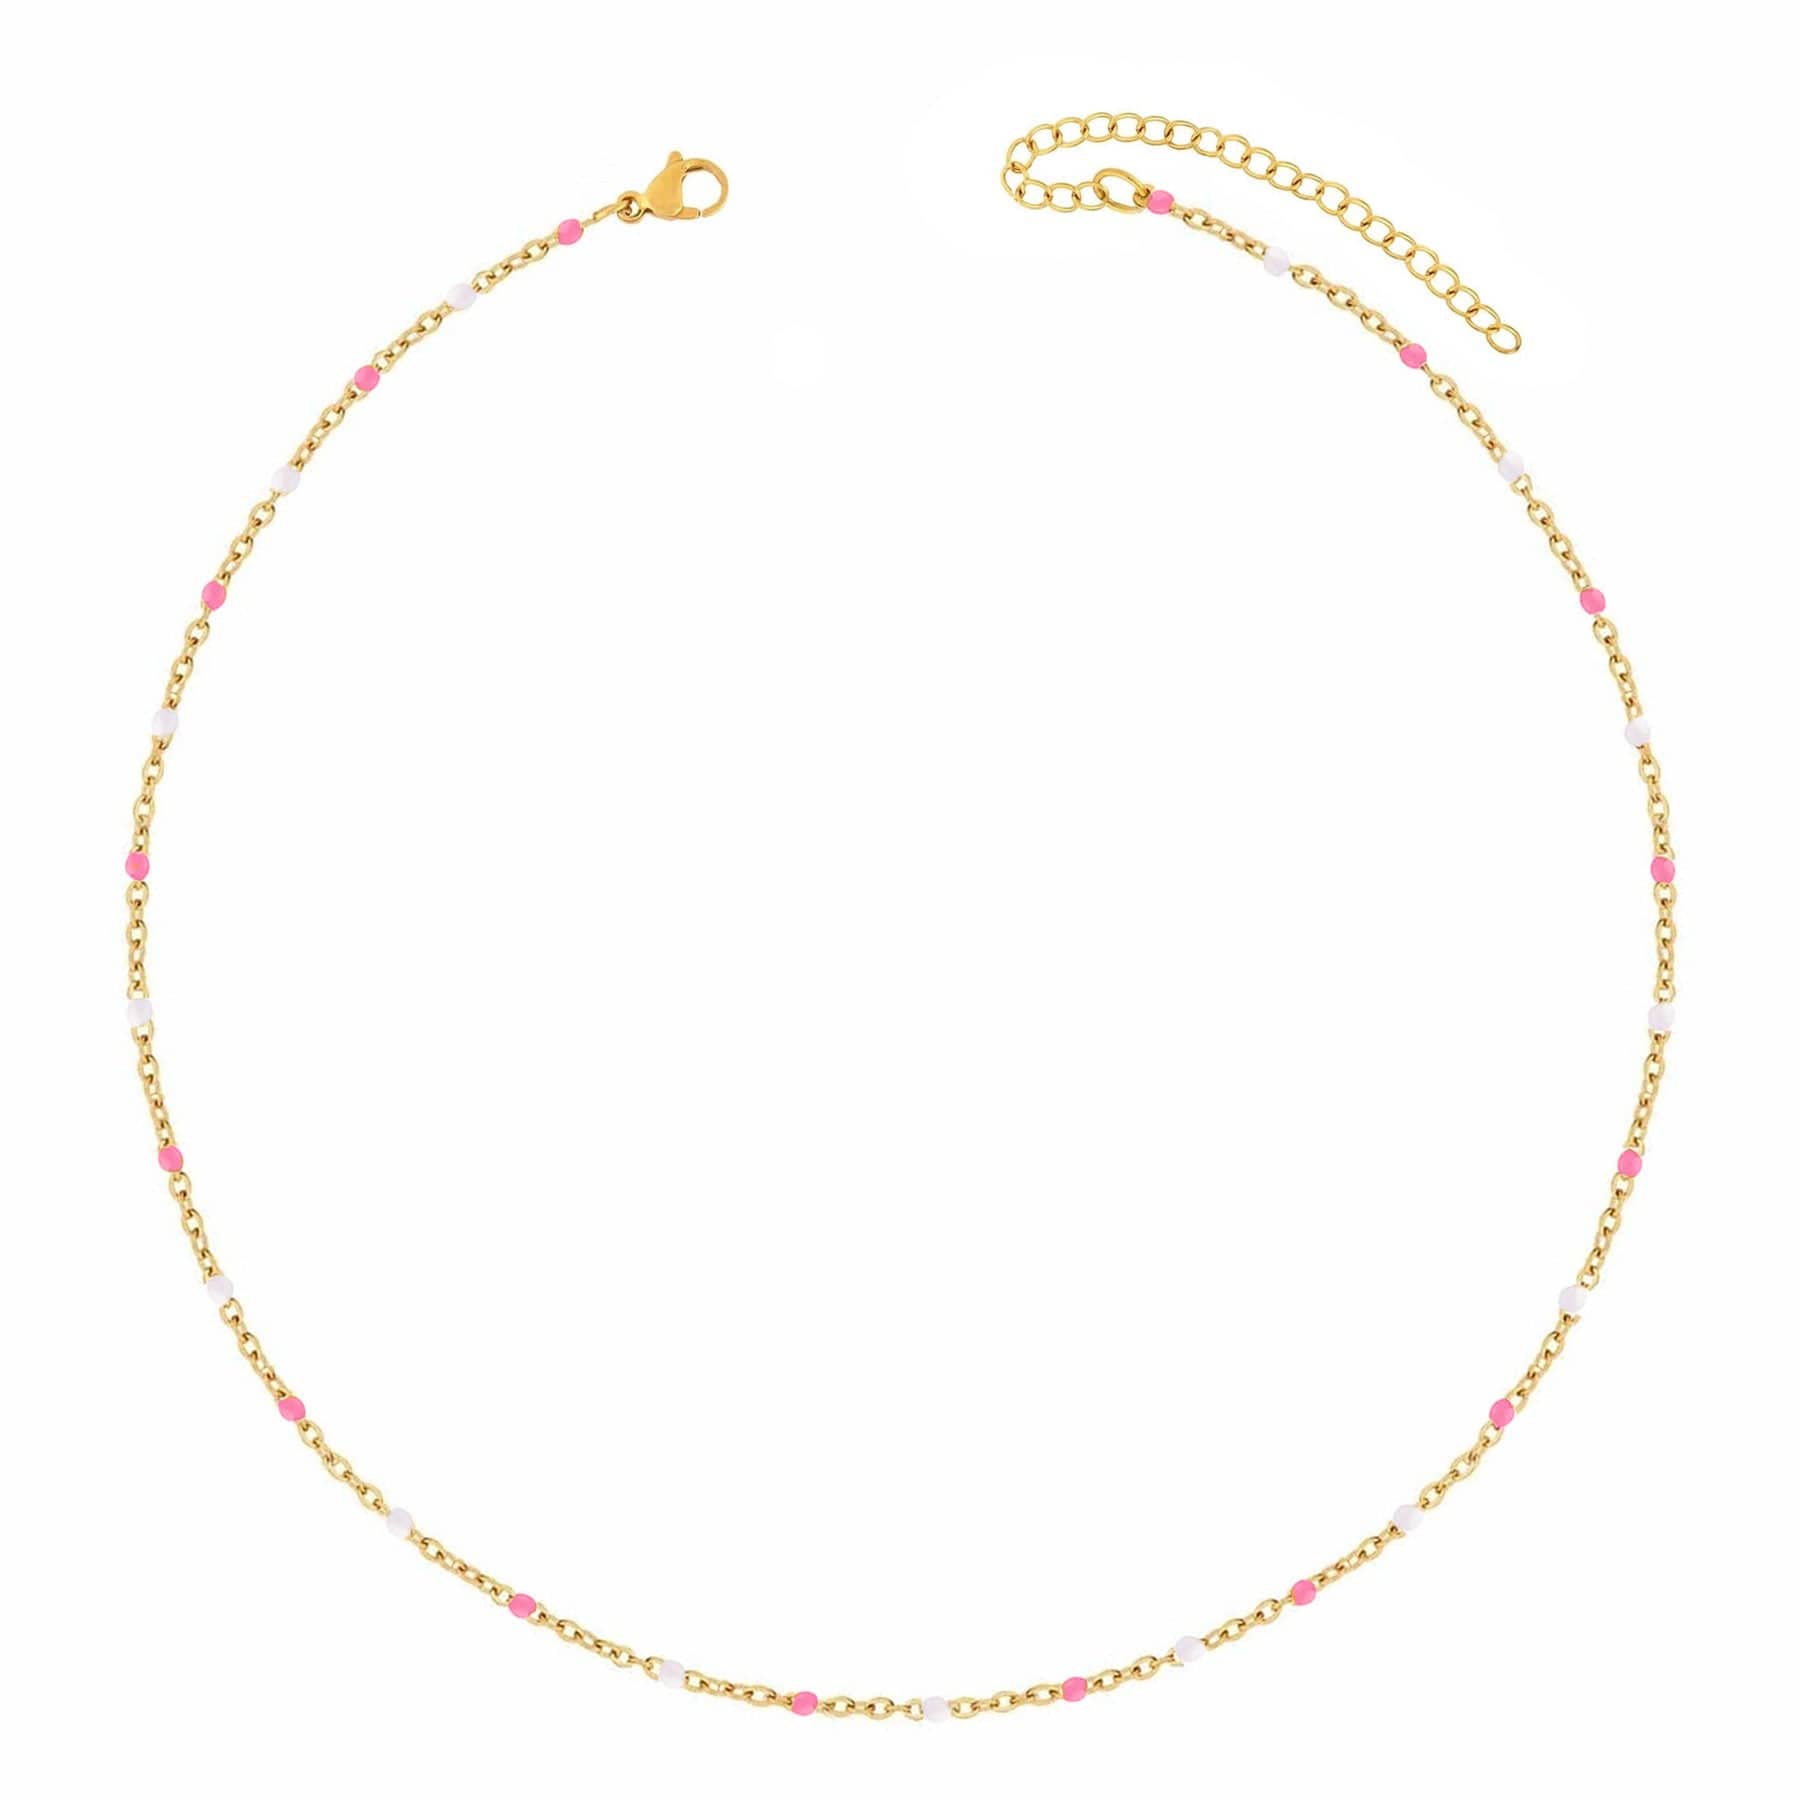 BohoMoon Stainless Steel Soda Belly Chain Gold / Pink / Small